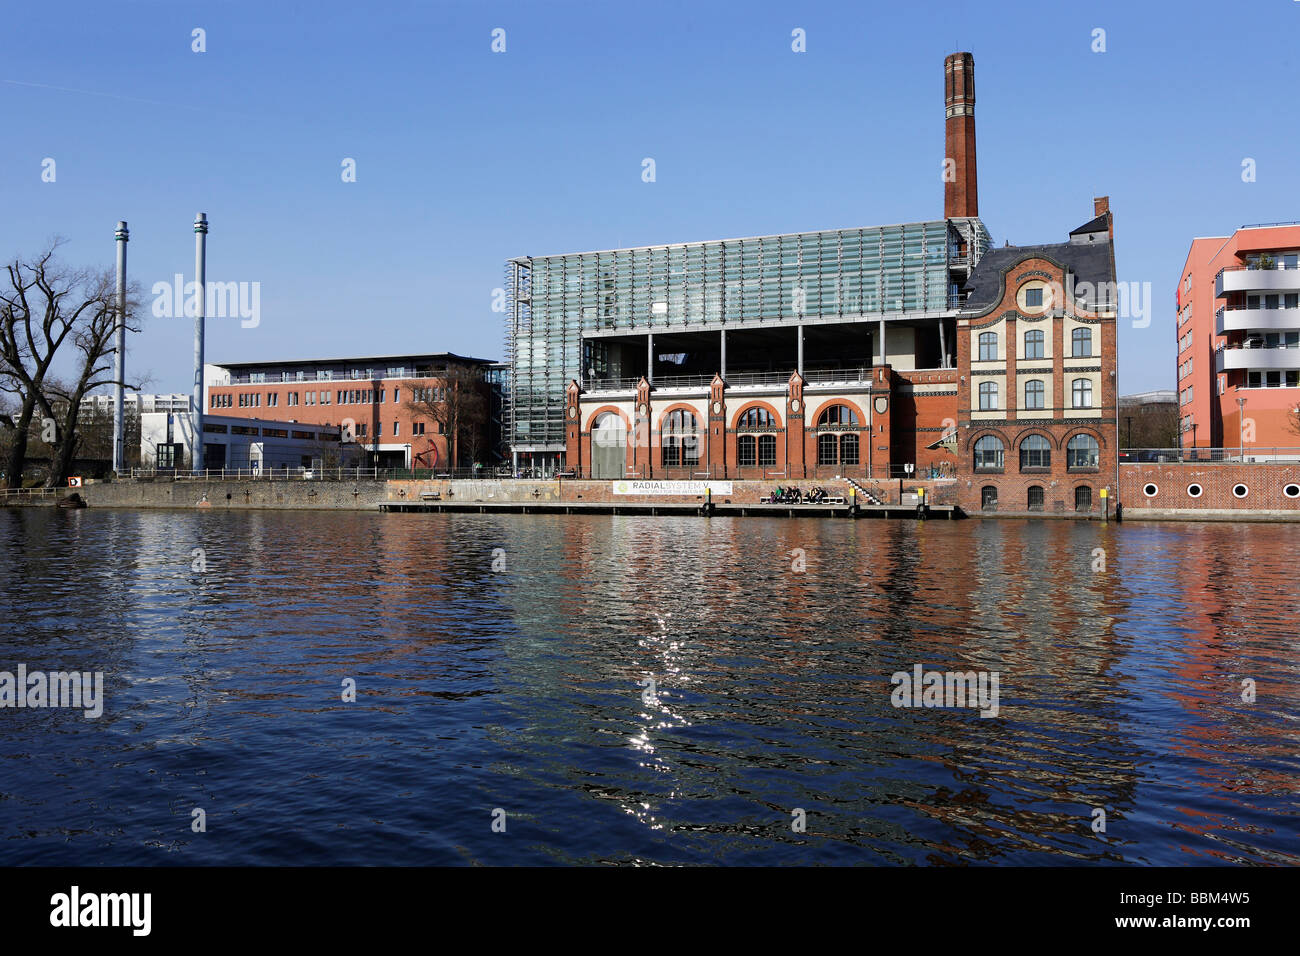 Radialsystem V, cultural venue and Ibis Hotel on the Spree River, Berlin, Germany, Europe Stock Photo